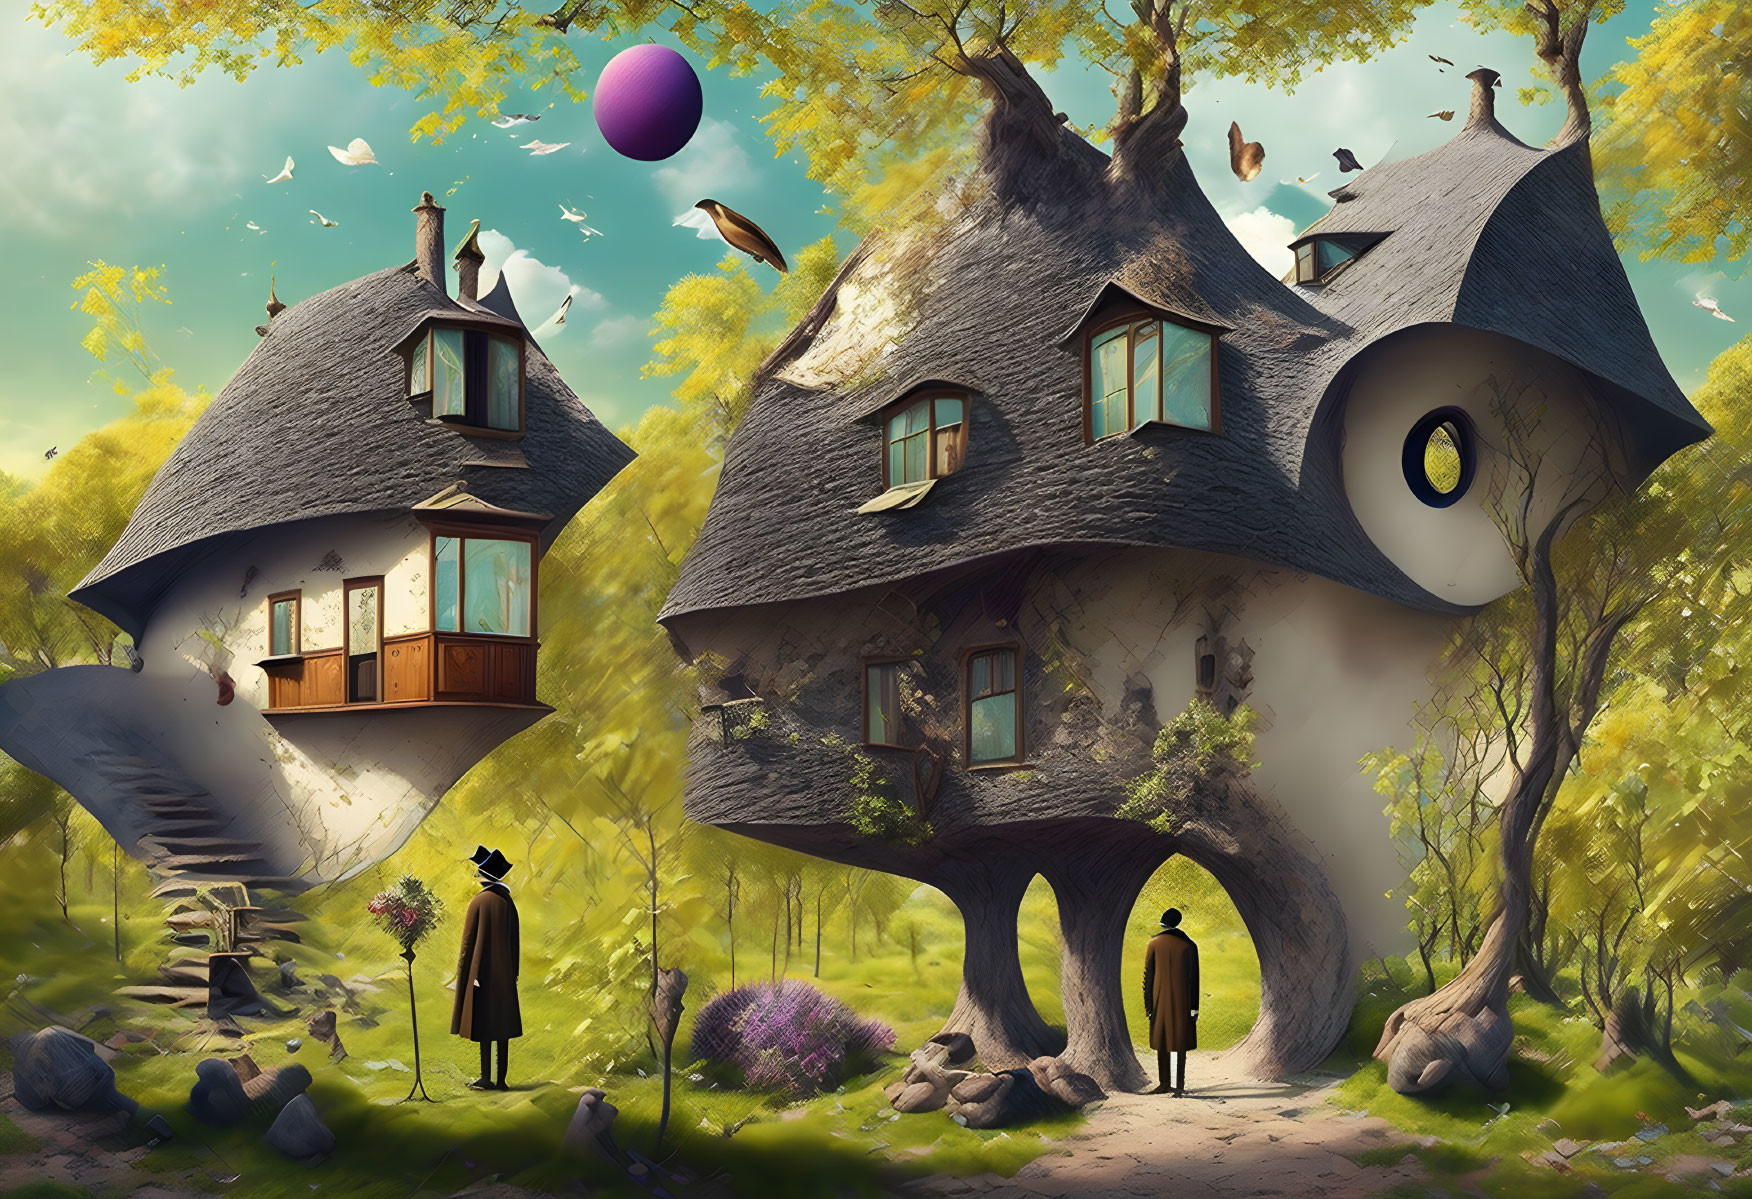 Unique Tree Houses in Whimsical Fairytale Landscape